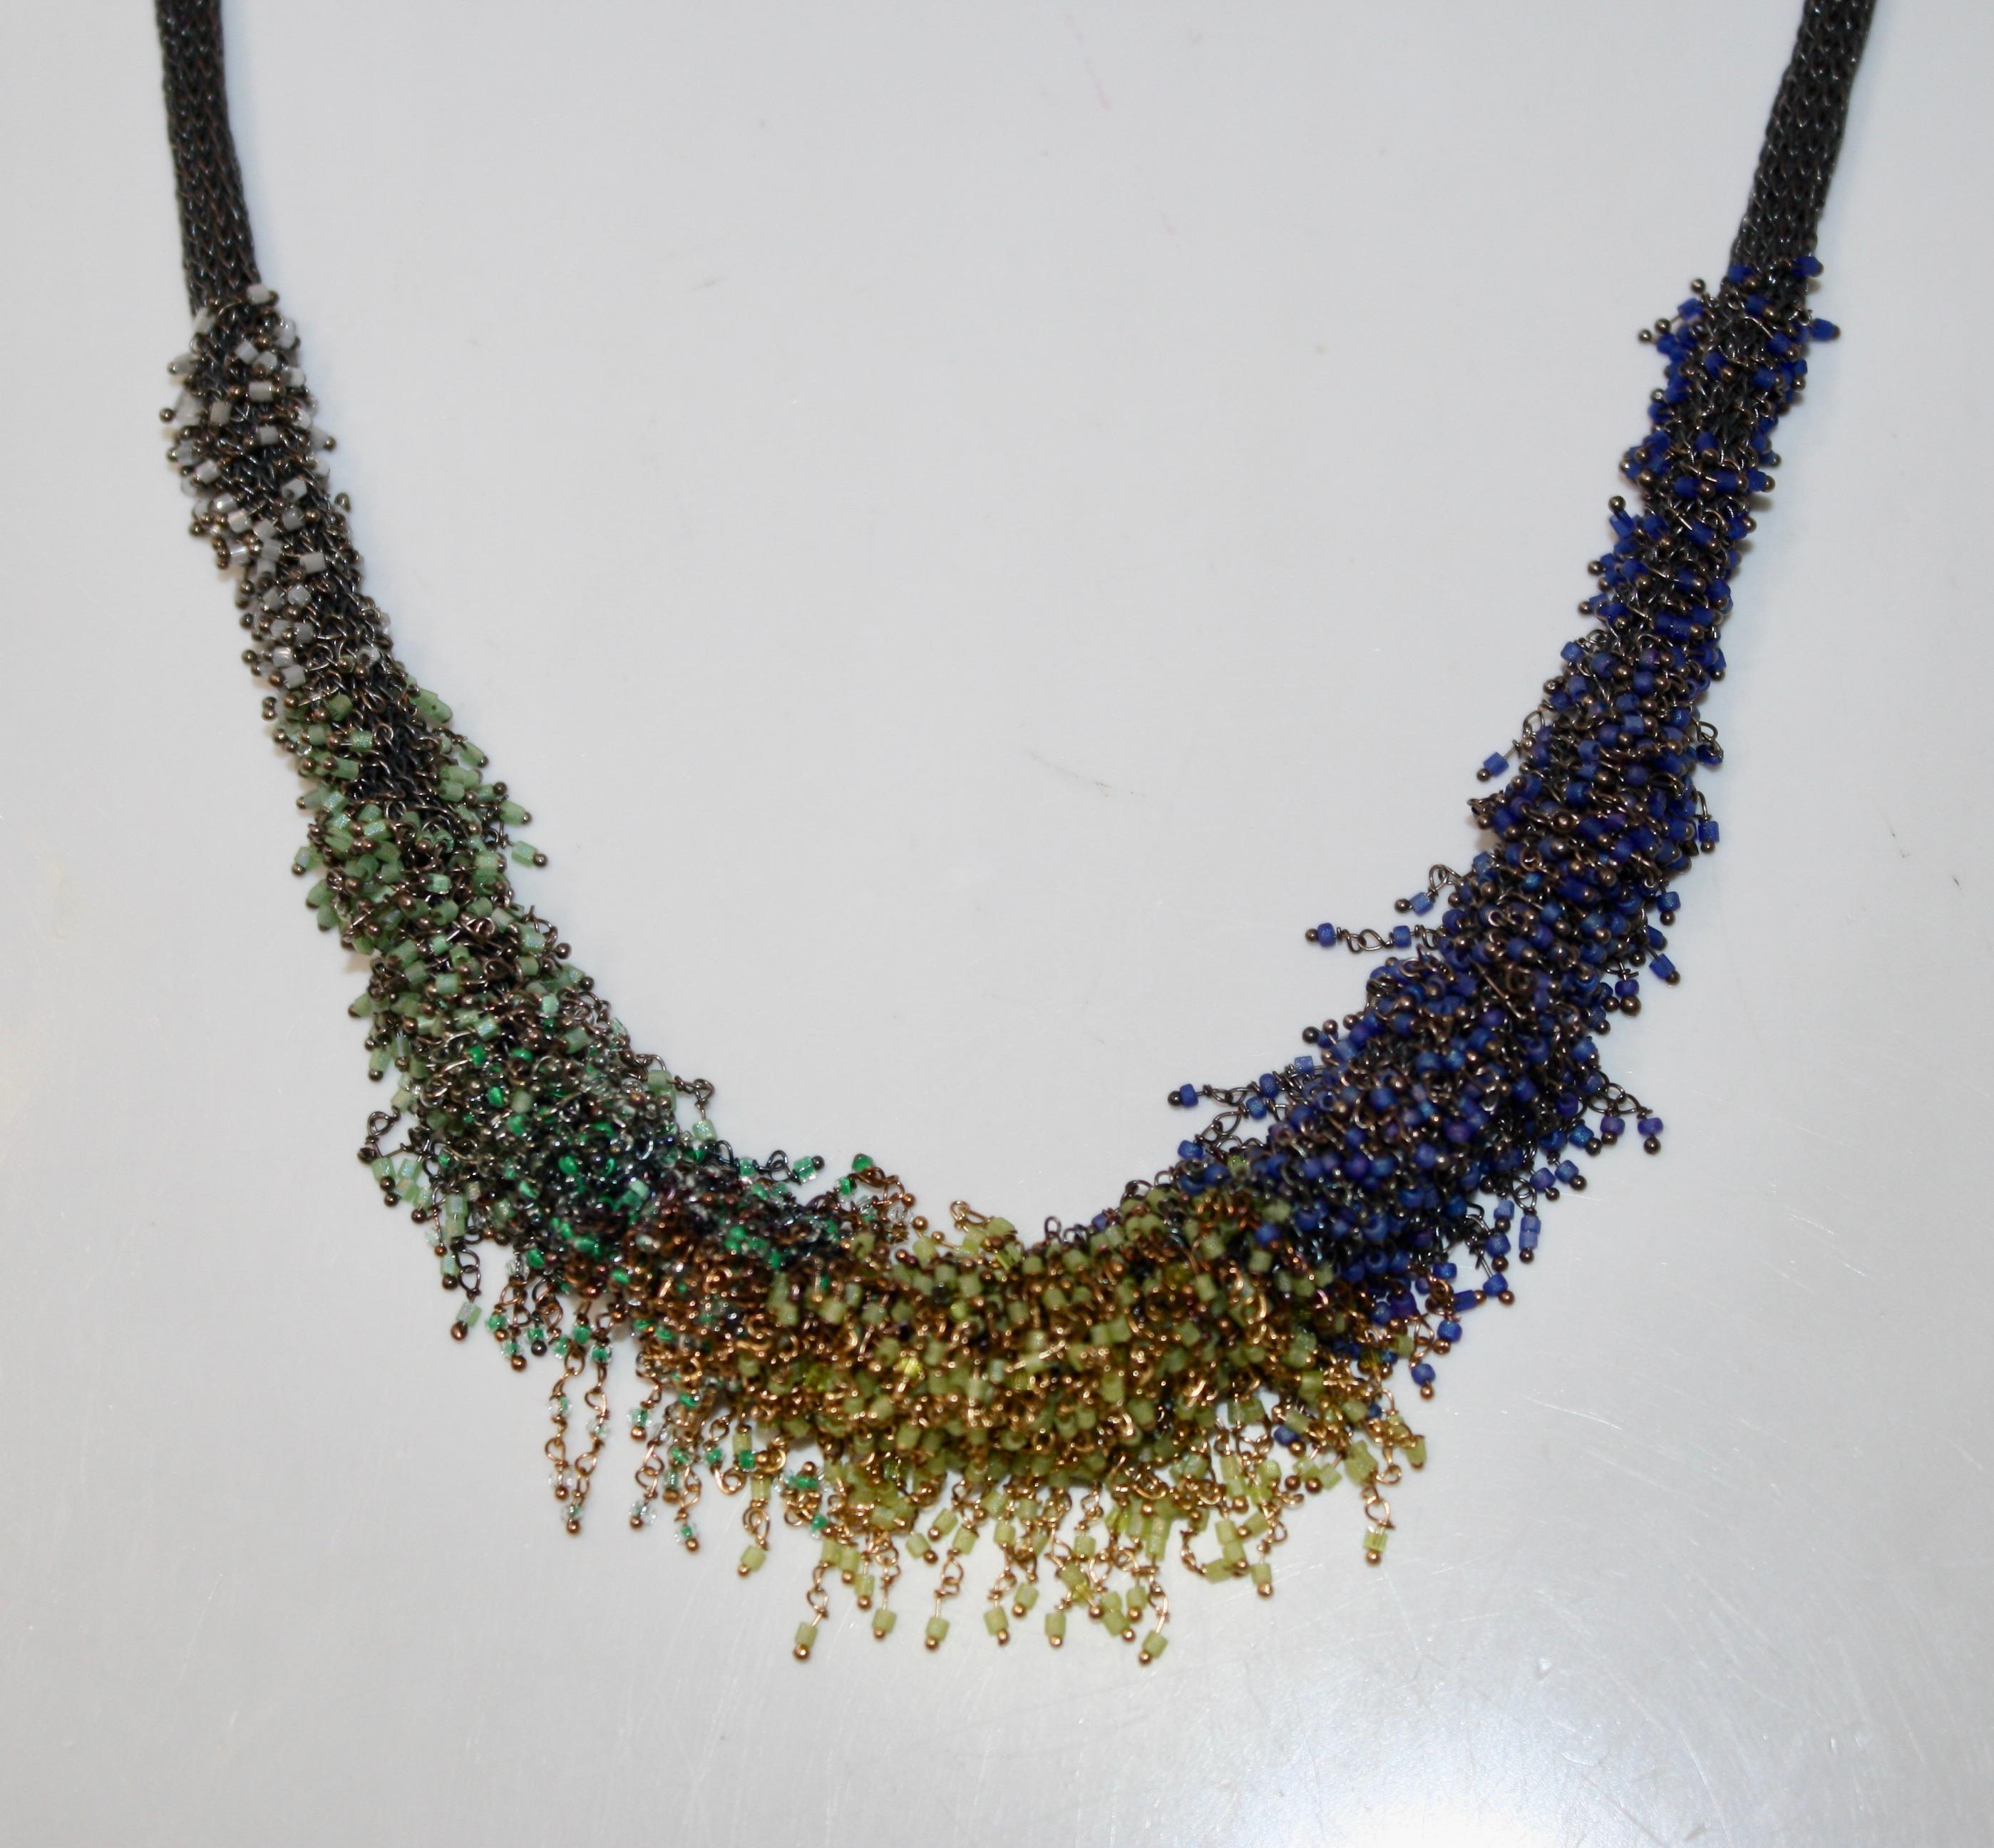 This beaded necklace by Milena Zu will lift your outfit to the next level.
This edgy Milena Zu mesh necklace is made of fine brass wire which has been partly silver plated and oxidised to an almost black colour. It is decorated with hundreds of tiny